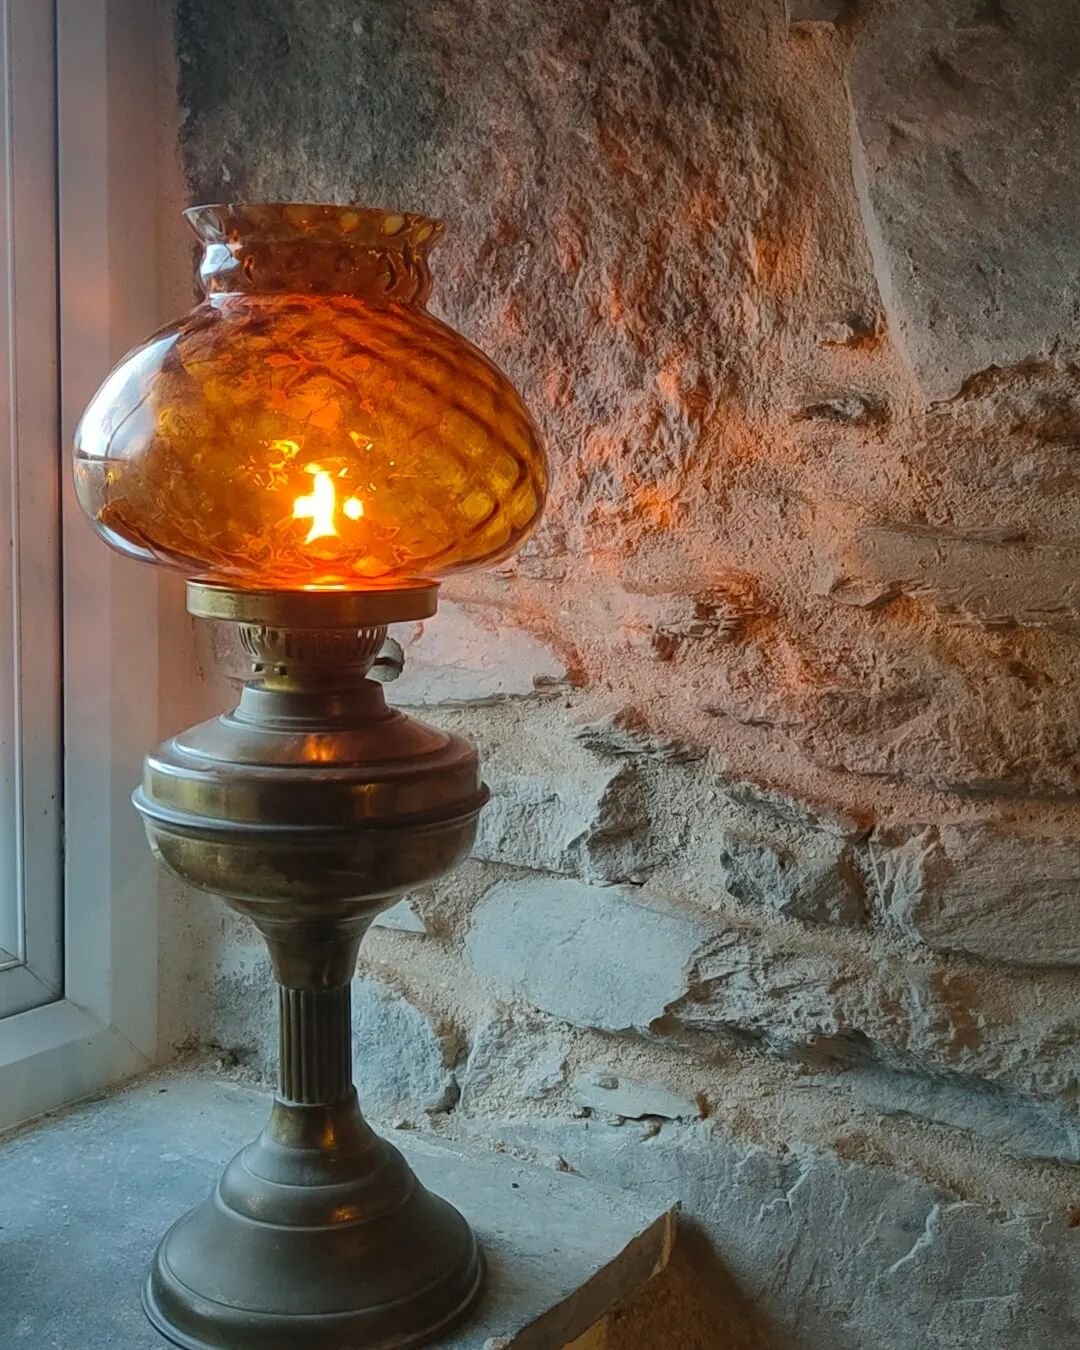 Does anyone else actually use paraffin lamps?

I've heard mixed things about their safety... But there's no denying their beauty.

(&pound;5 charity treasure)

#livelikeamammal
#interiordesign
#renovation 
#cornishstonecottage
#restoration 
#design
#